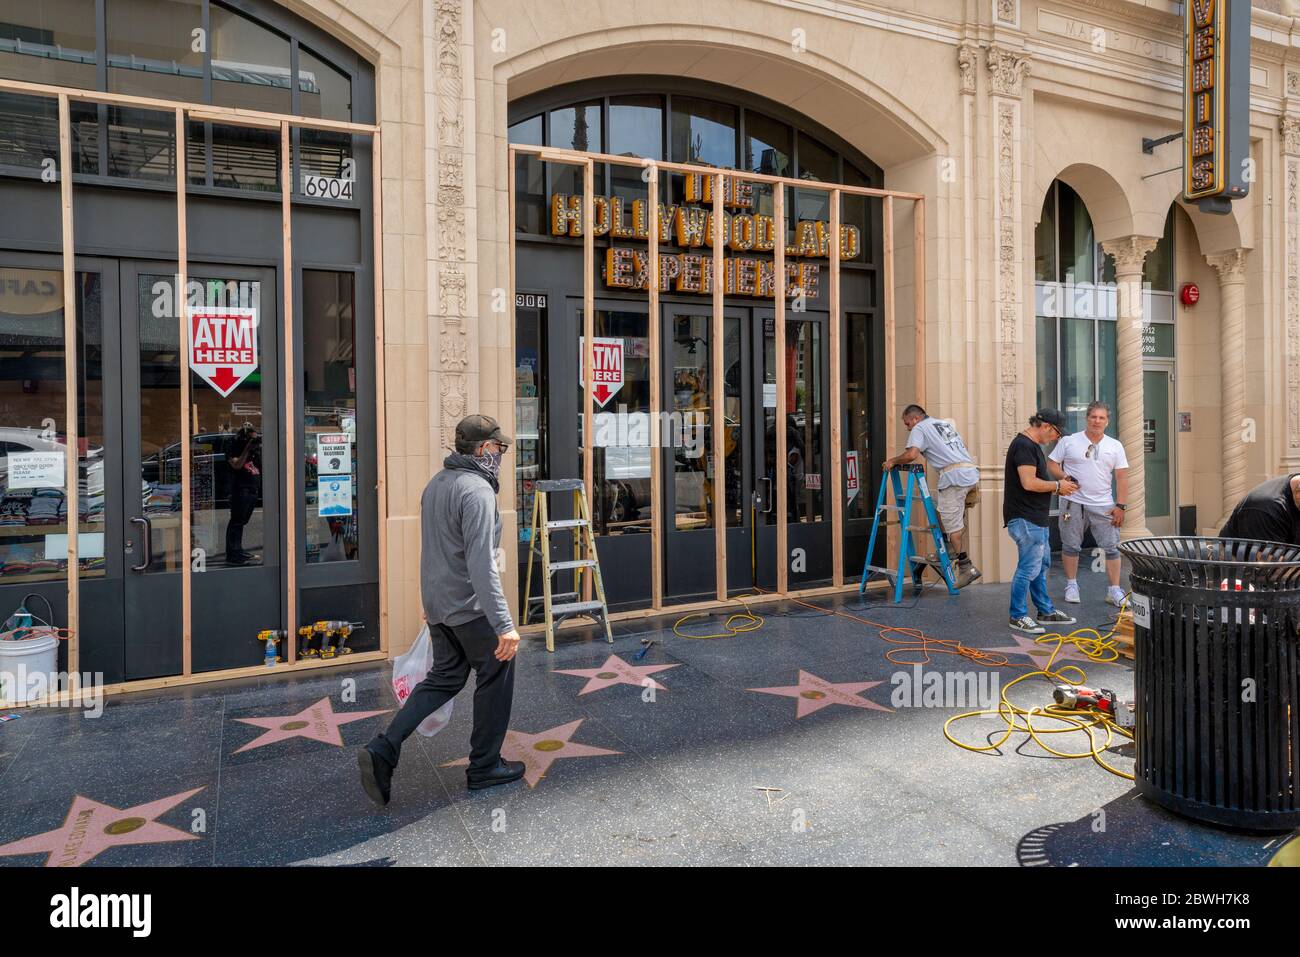 Los Angeles, USA, 1st June, 2020. Worker preemptively constructing wooden protective wall in front of the entrance to a gift shop called The Hollywood Experience, in response to looting and vandalism during the George Floyd protests. Credit: Jim Newberry/Alamy Live News. Stock Photo